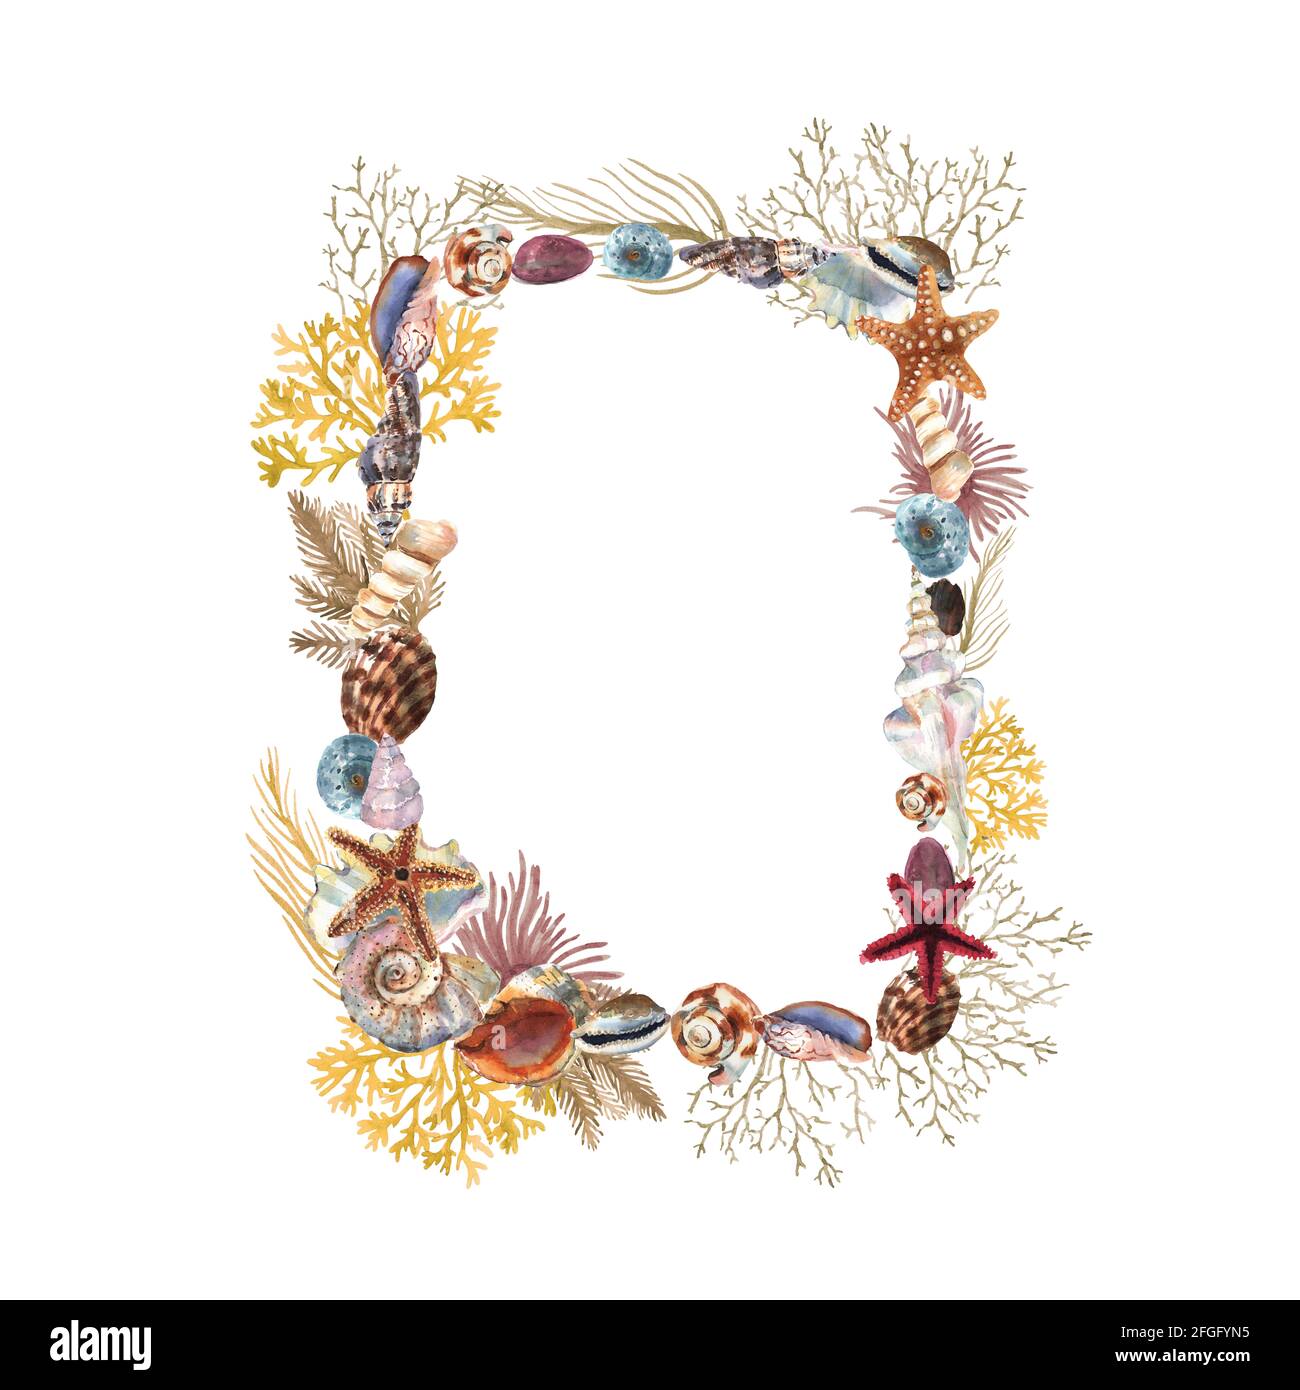 Beautiful watercolor frame with colorful sea shells, stars and plants for decorative design. Artistic backdrop. Underwater floral illustration. Stock Photo